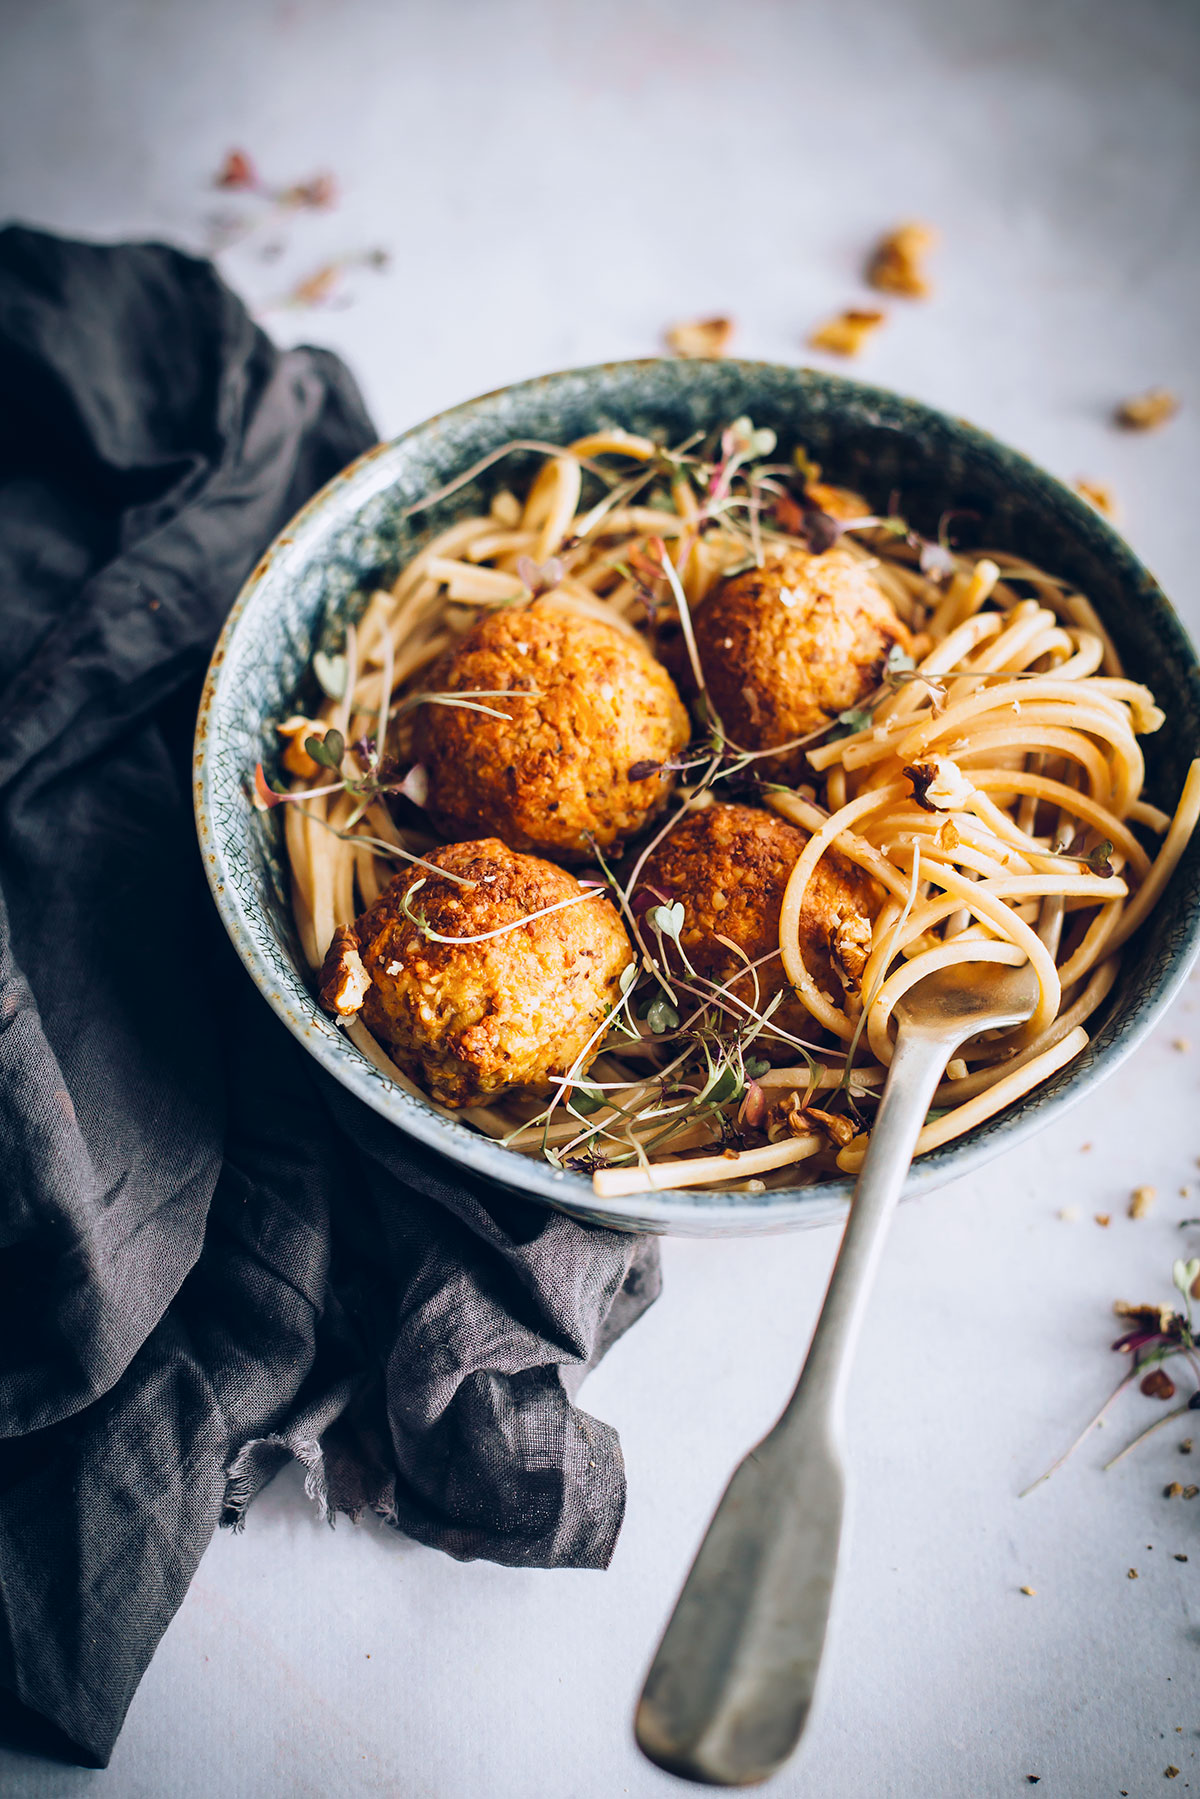 8 Recipes for Vegetarian Meatballs You Need to Try